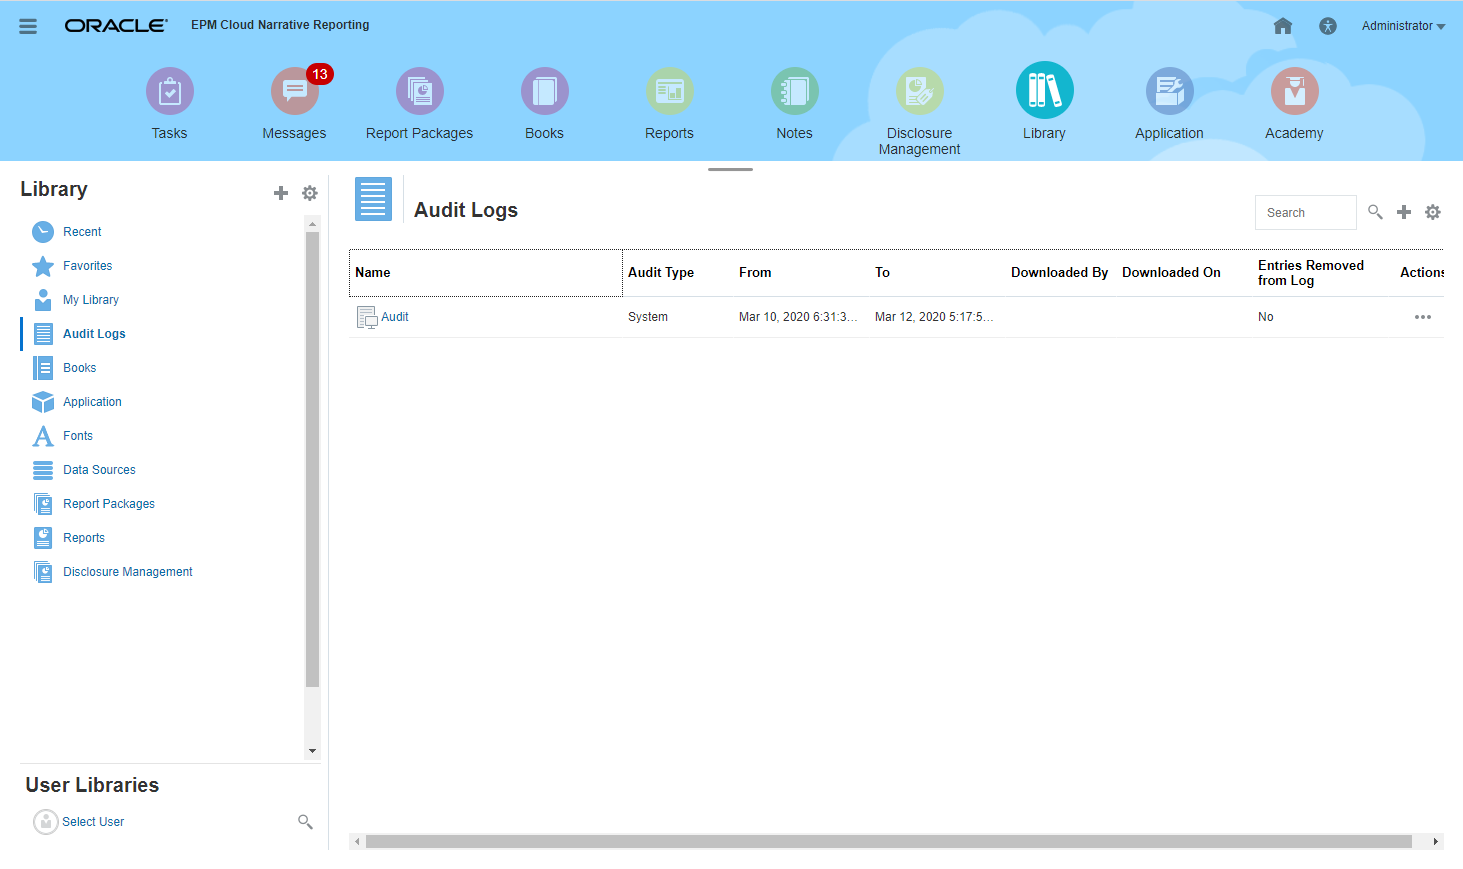 Select System Audit from Audit Logs folder in the library.